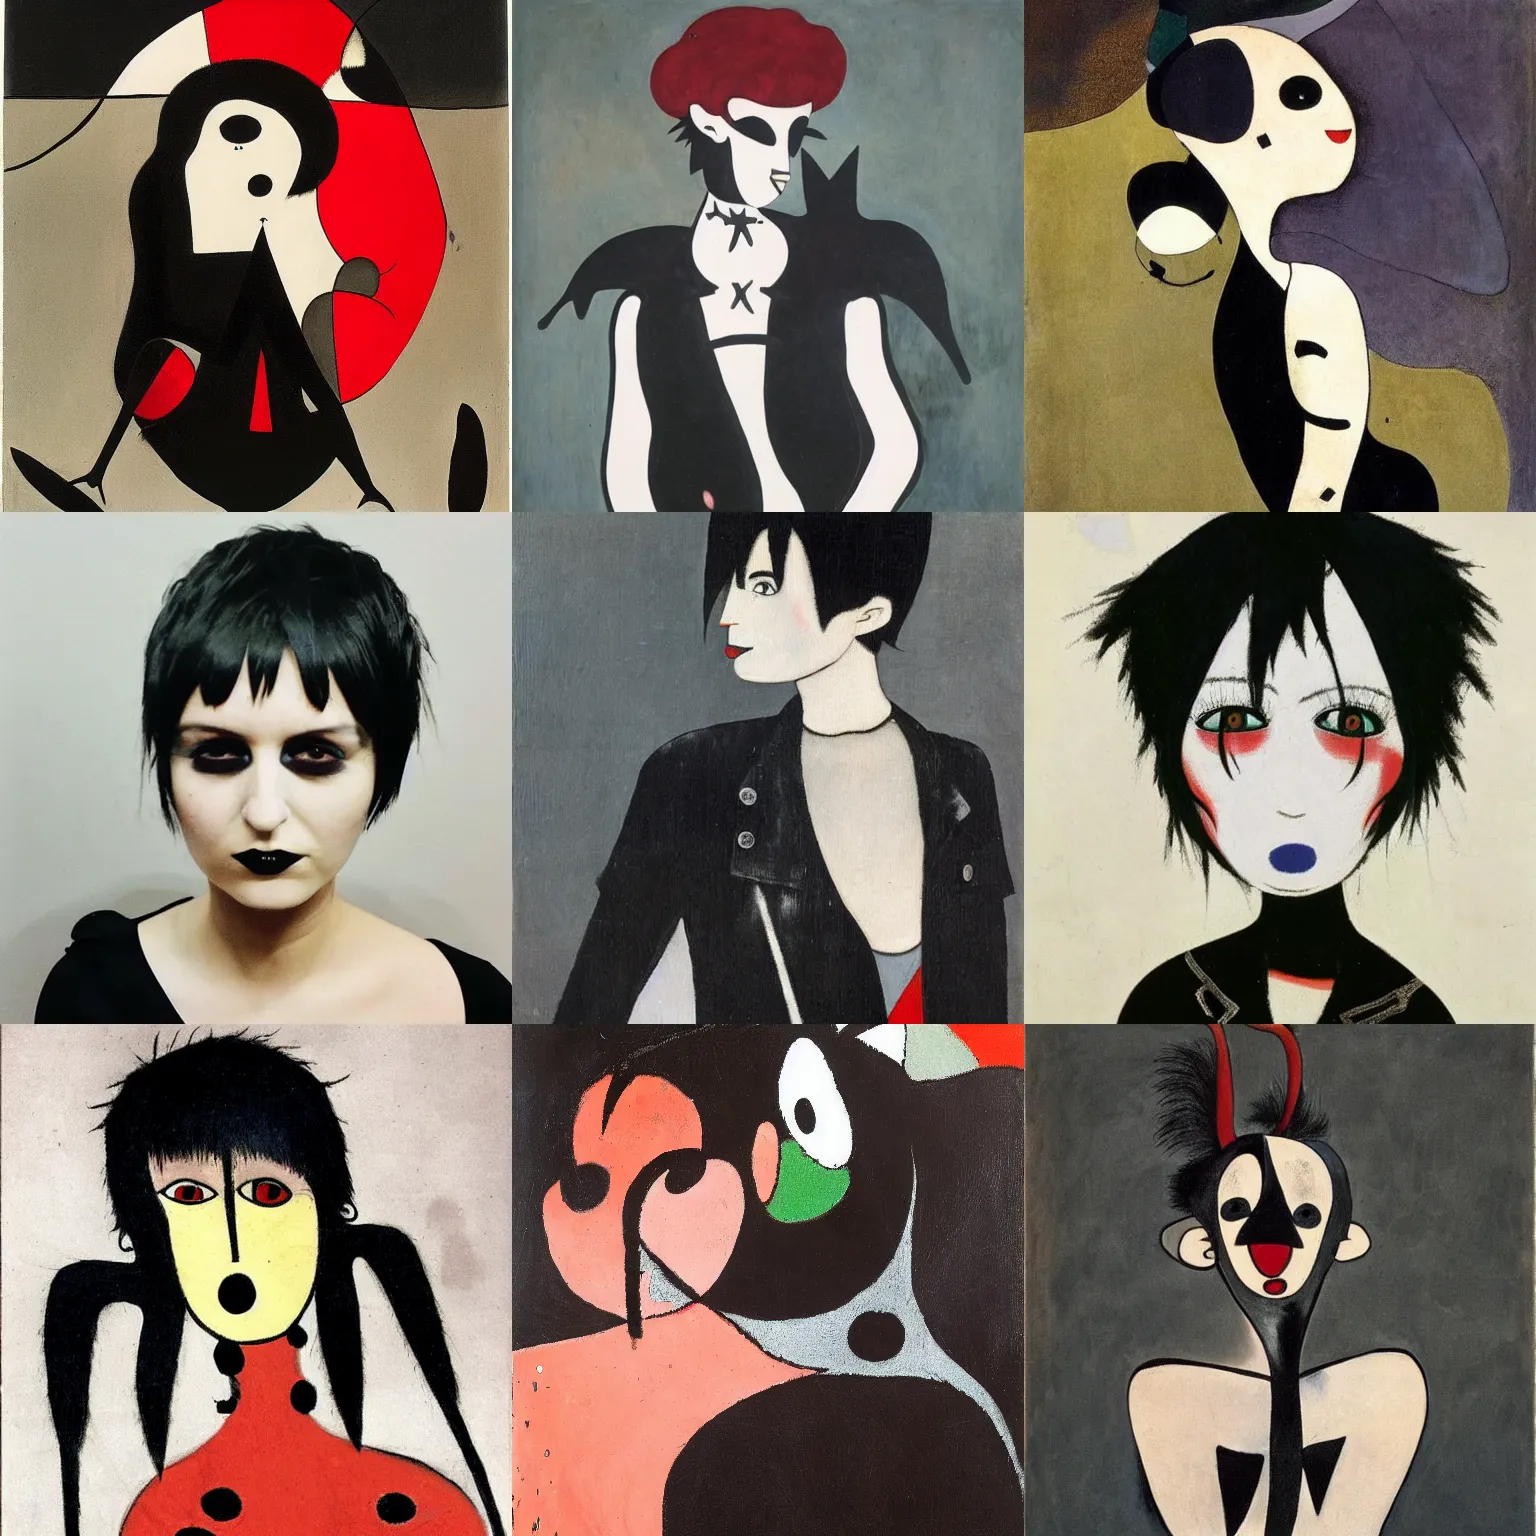 Prompt: A goth painted by Joan Miro. Her hair is dark brown and cut into a short, messy pixie cut. She has a slightly rounded face, with a pointed chin, large entirely-black eyes, and a small nose. She is wearing a black tank top, a black leather jacket, a black knee-length skirt, a black choker, and black leather boots.